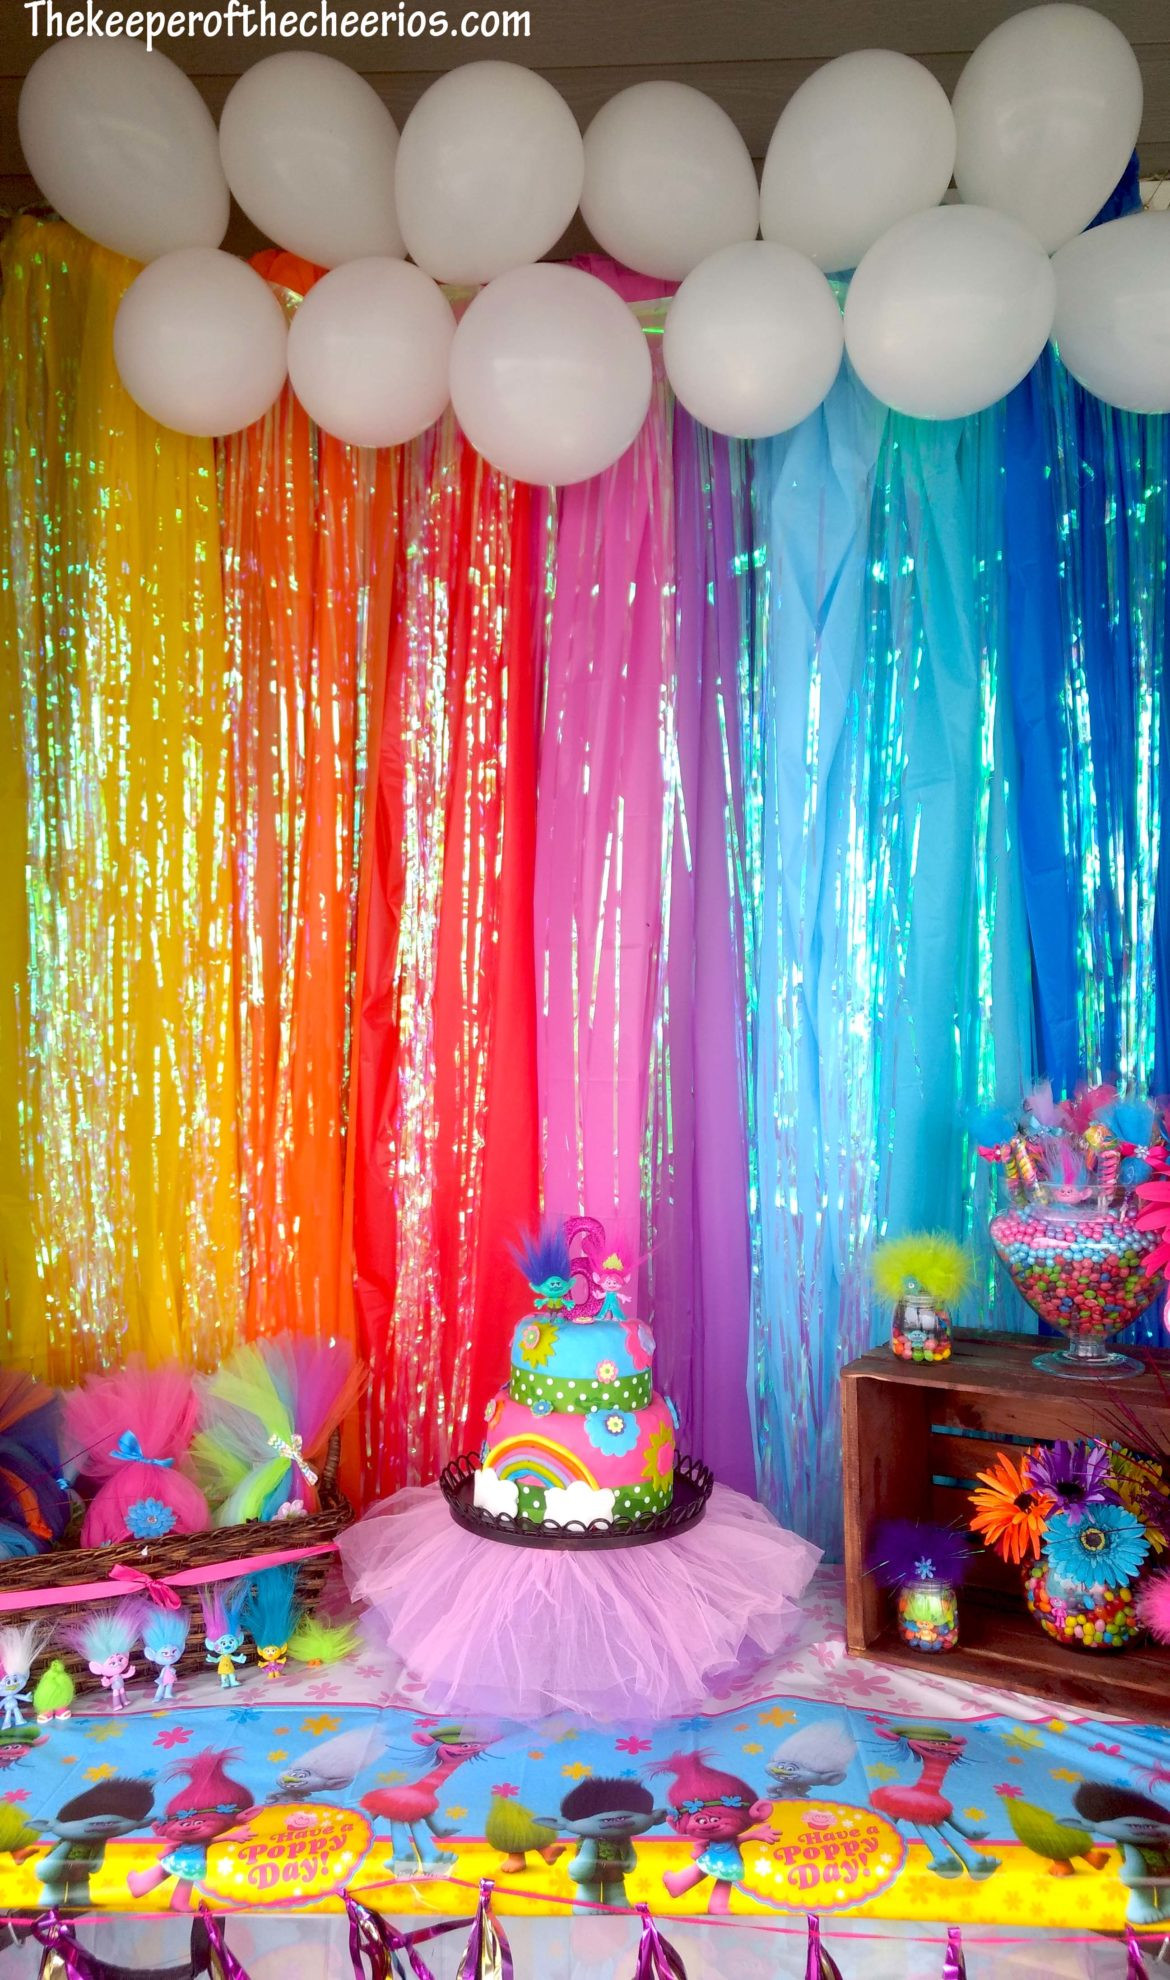 Best ideas about Trolls Birthday Party
. Save or Pin Trolls Birthday Party The Keeper of the Cheerios Now.